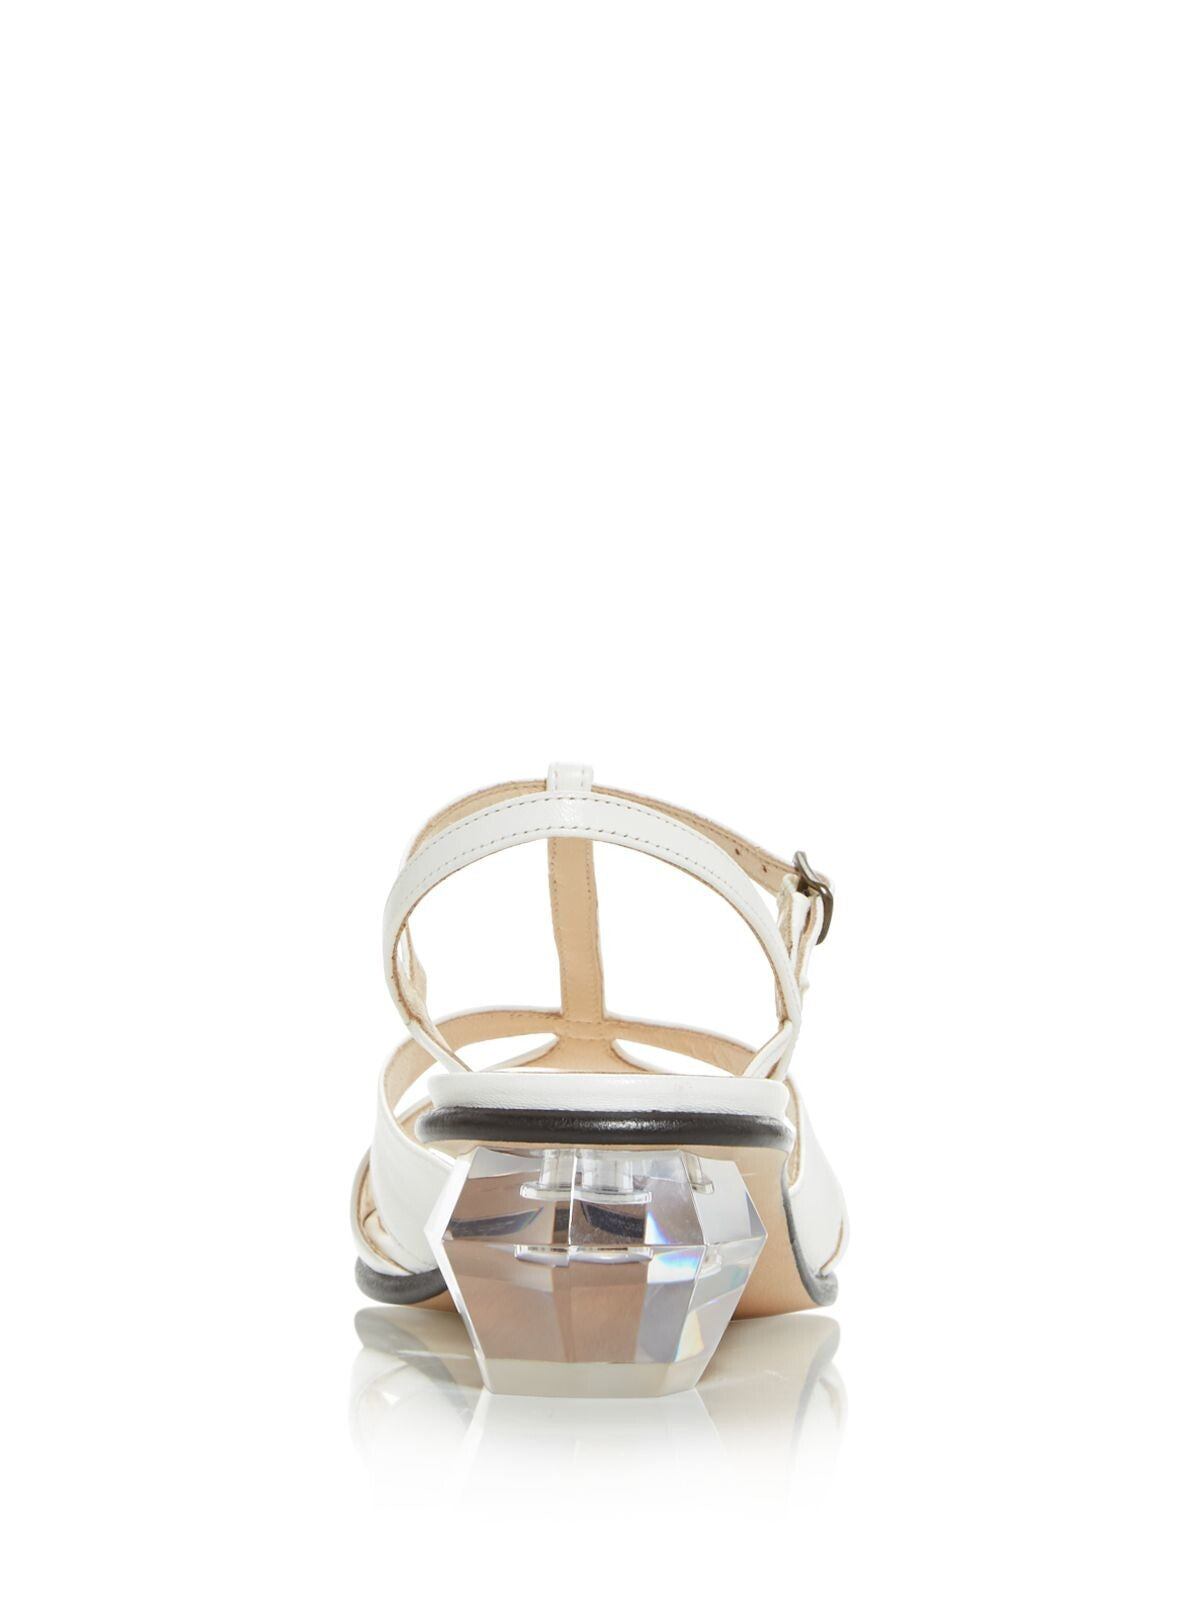 MARC JACOBS Womens White Adjustable Padded T-Strap Strappy The Gem Square Toe Sculpted Heel Buckle Leather Dress Slingback Sandal 36